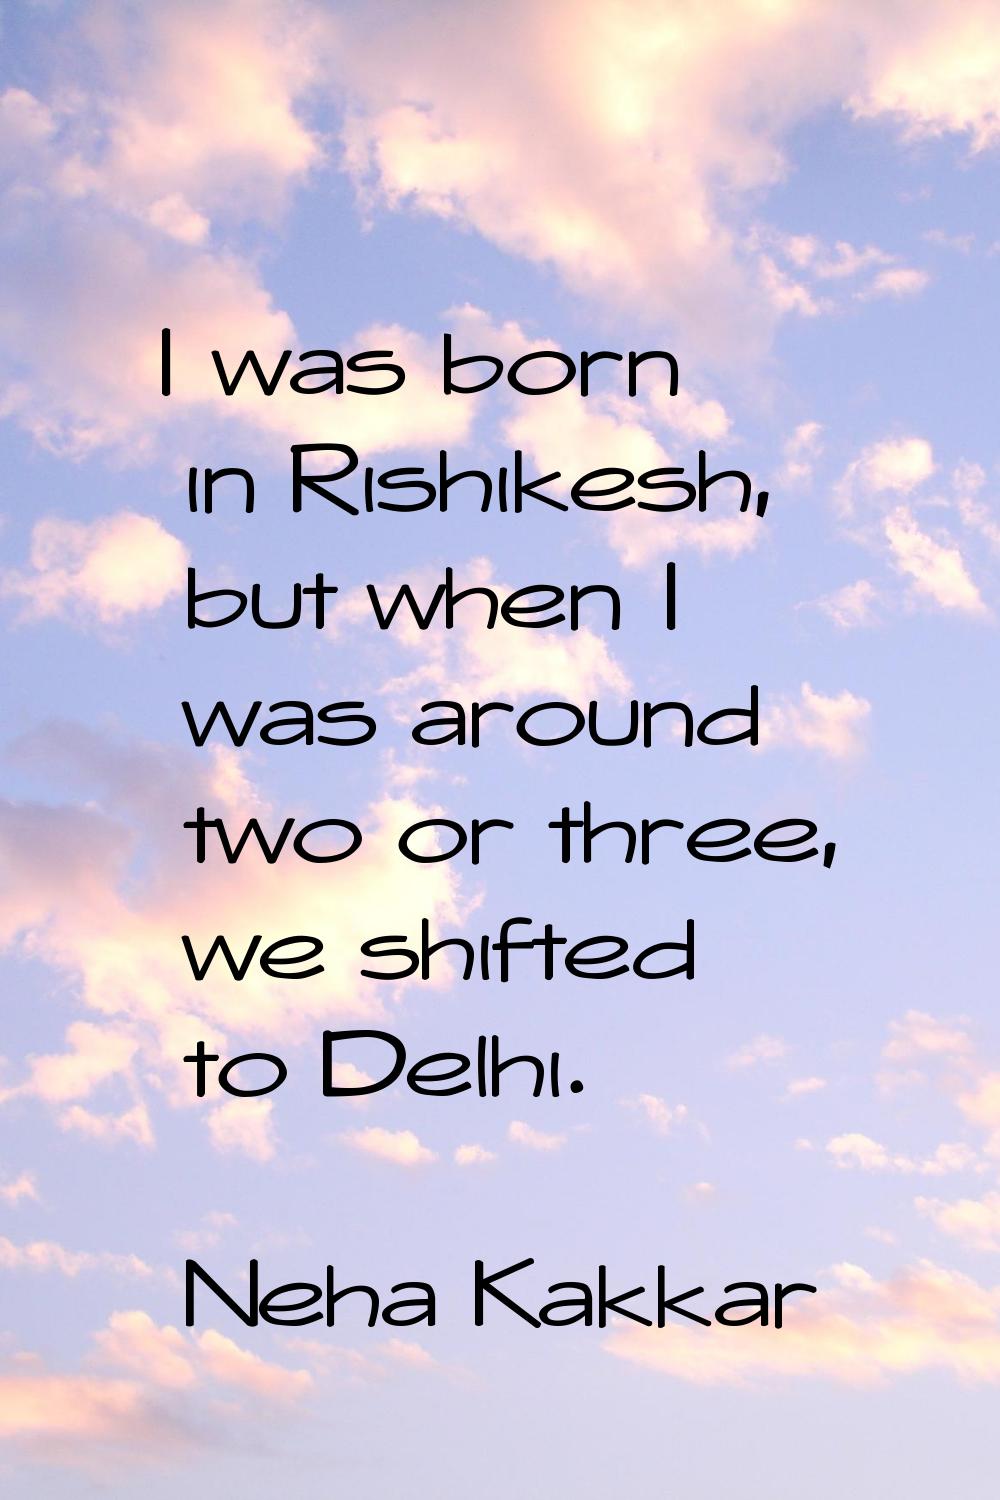 I was born in Rishikesh, but when I was around two or three, we shifted to Delhi.